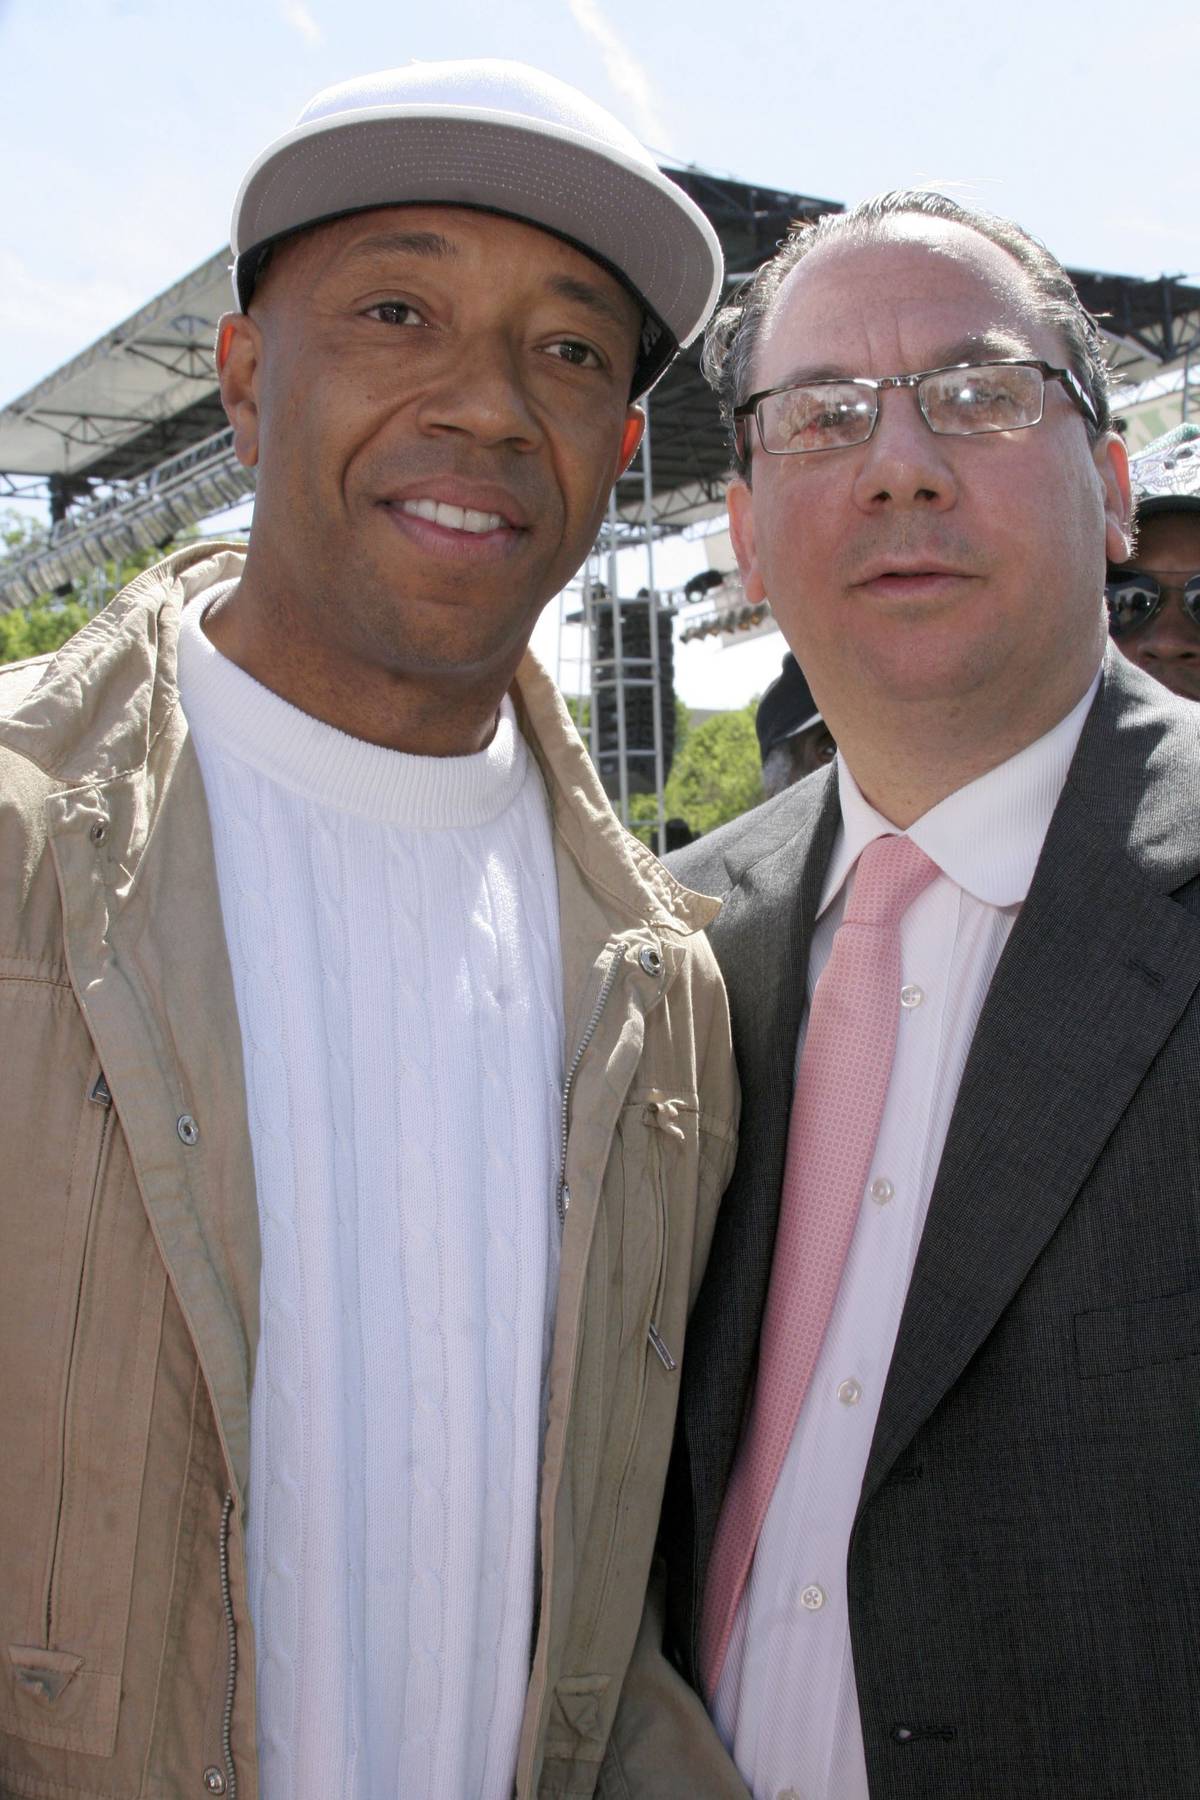 Russell Simmons (L) and Rabbi Marc Schneier (R) arrive at the ‘Save Darfur: Rally To Stop Genocide’ in Washington, DC, April 30, 2006.